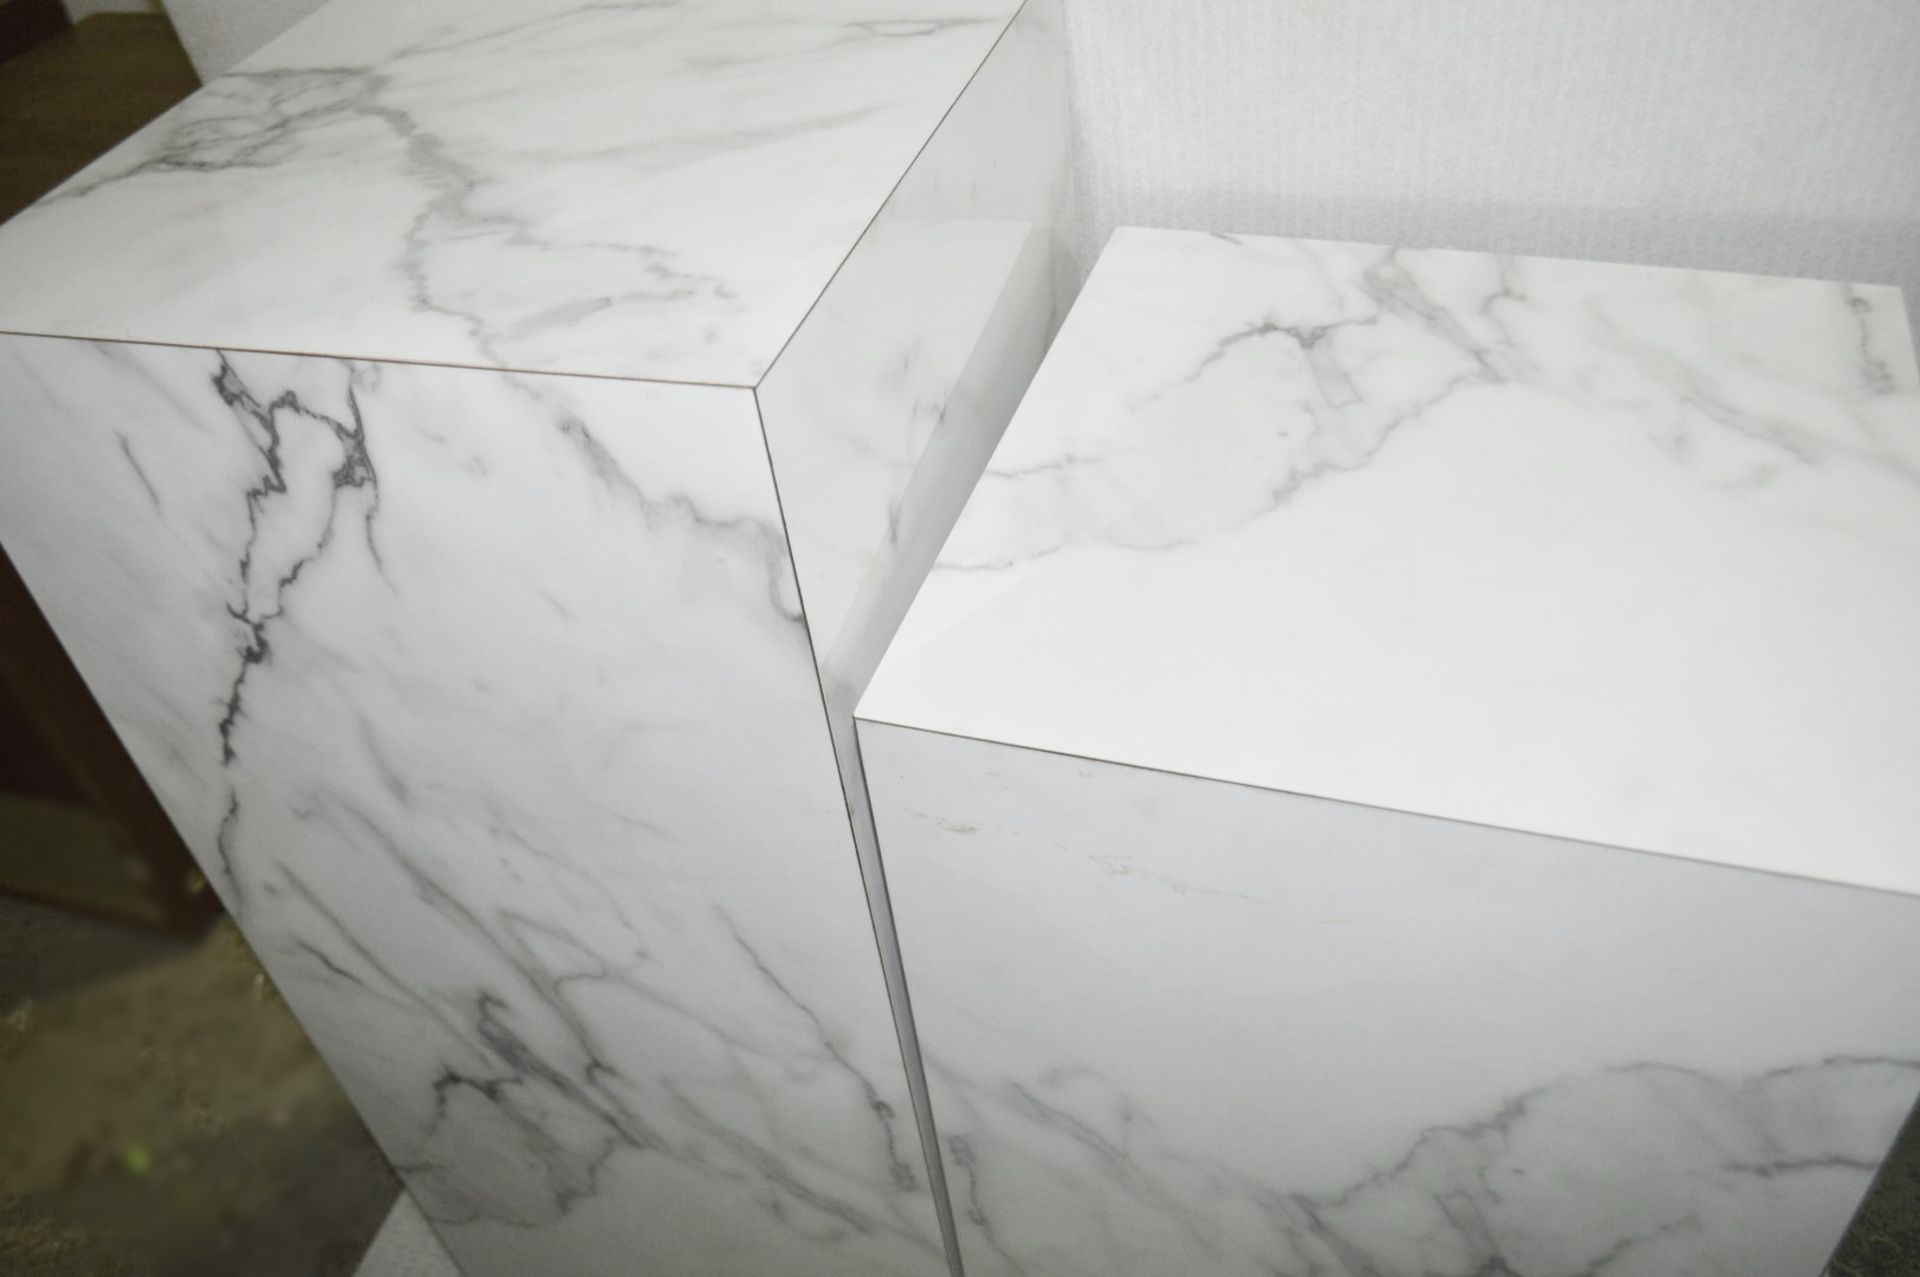 2 x Shop Display Plinths With A Faux-Marble Laminate Finish In WHITE With Brass Coloured Bases - Image 3 of 3